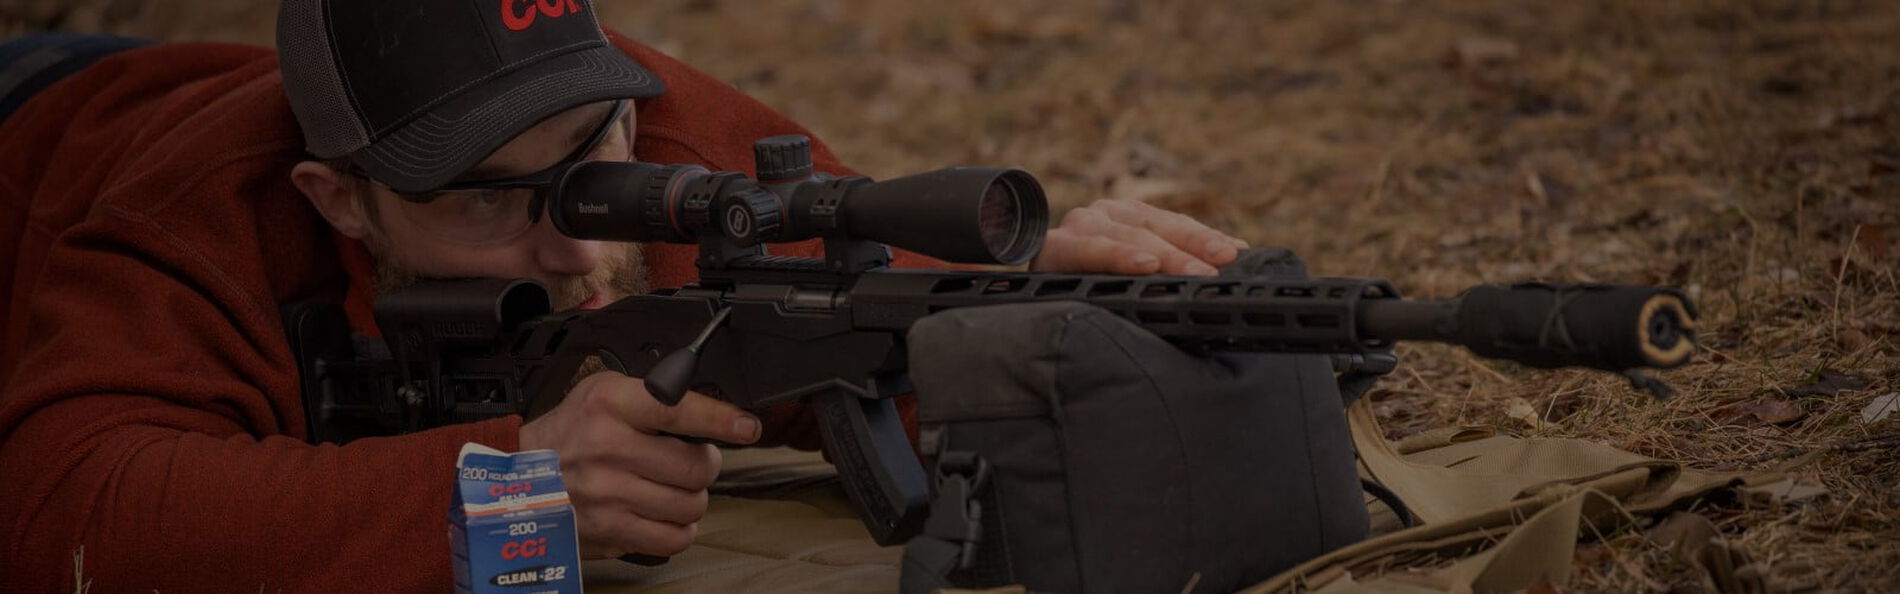 shooter in a prone position looking down a scope with rifle resting on a bag